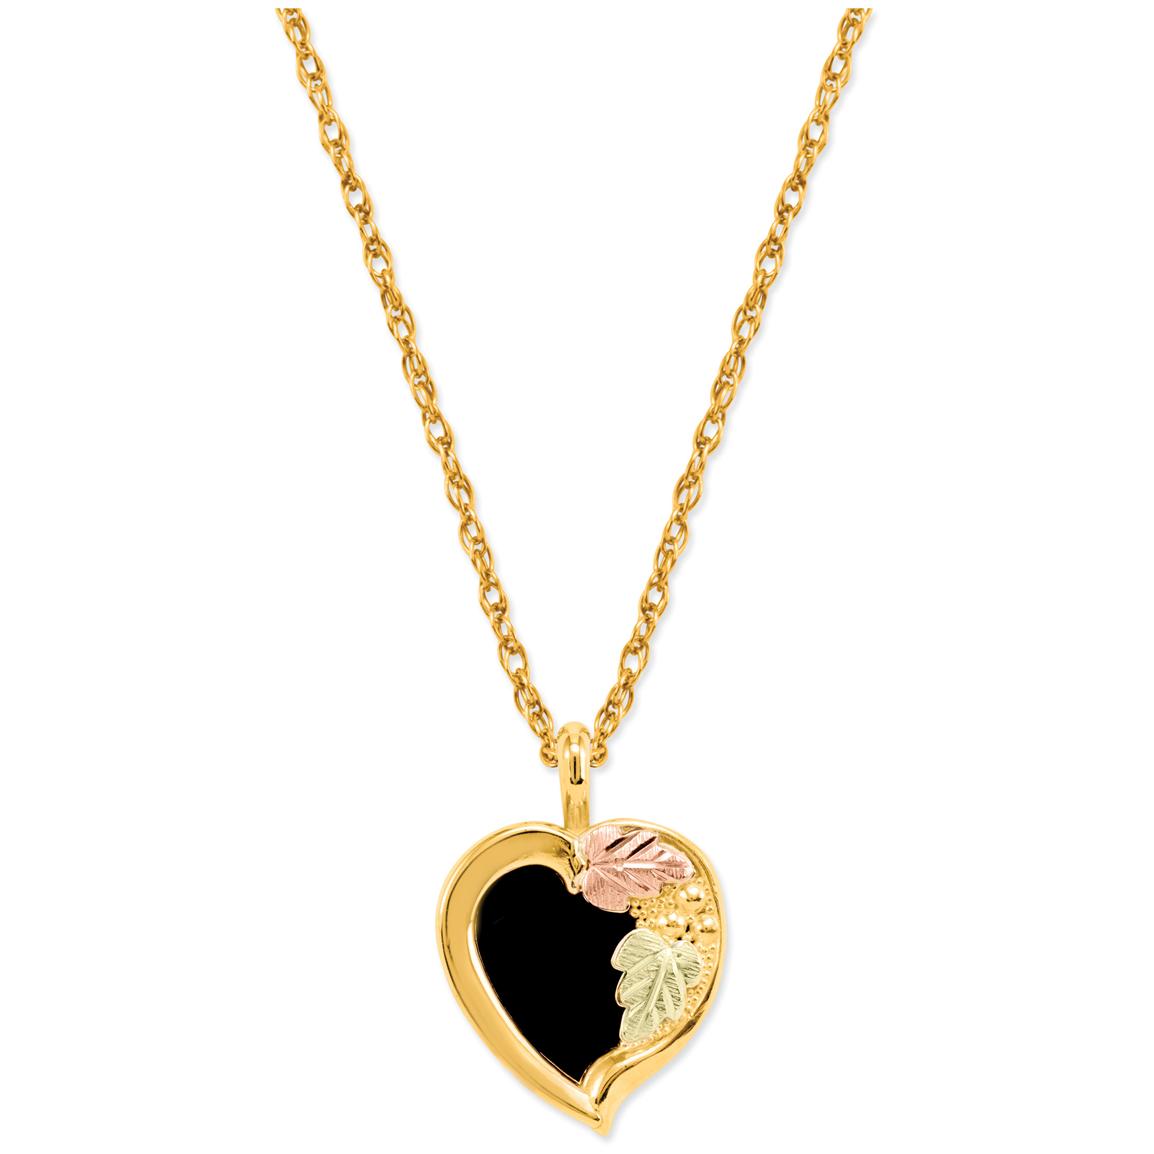 Black Hills Gold 10K Onyx Heart Pendant Necklace - 223283, Jewelry at